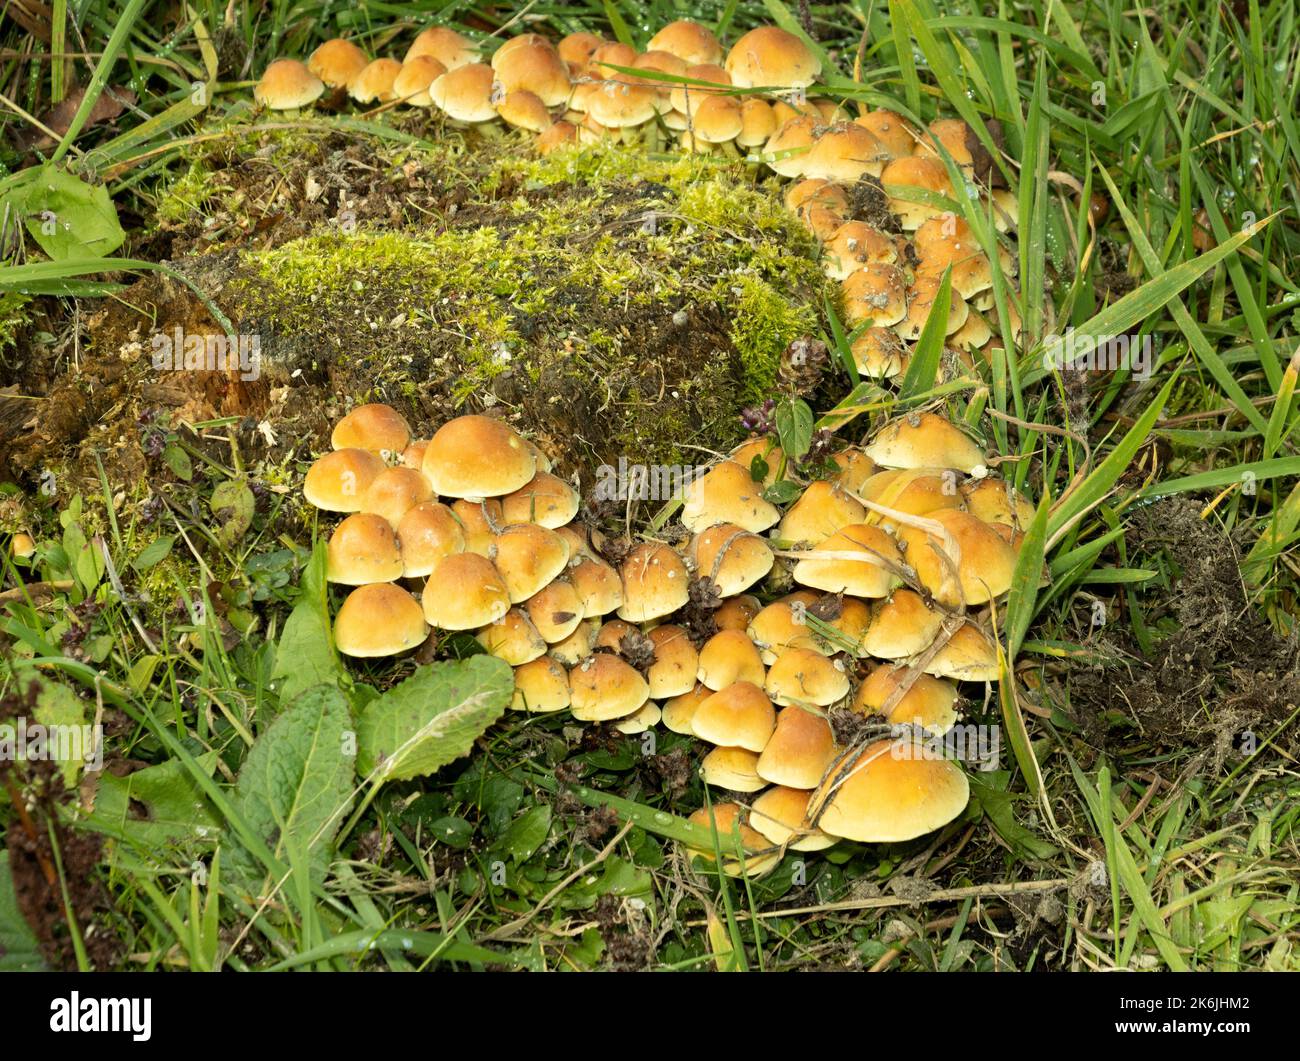 Differing with a smaller size from its relative, the Sulphur Tuft, the Conifer Tuft is found in dense clumps on decaying conifer wood. Stock Photo